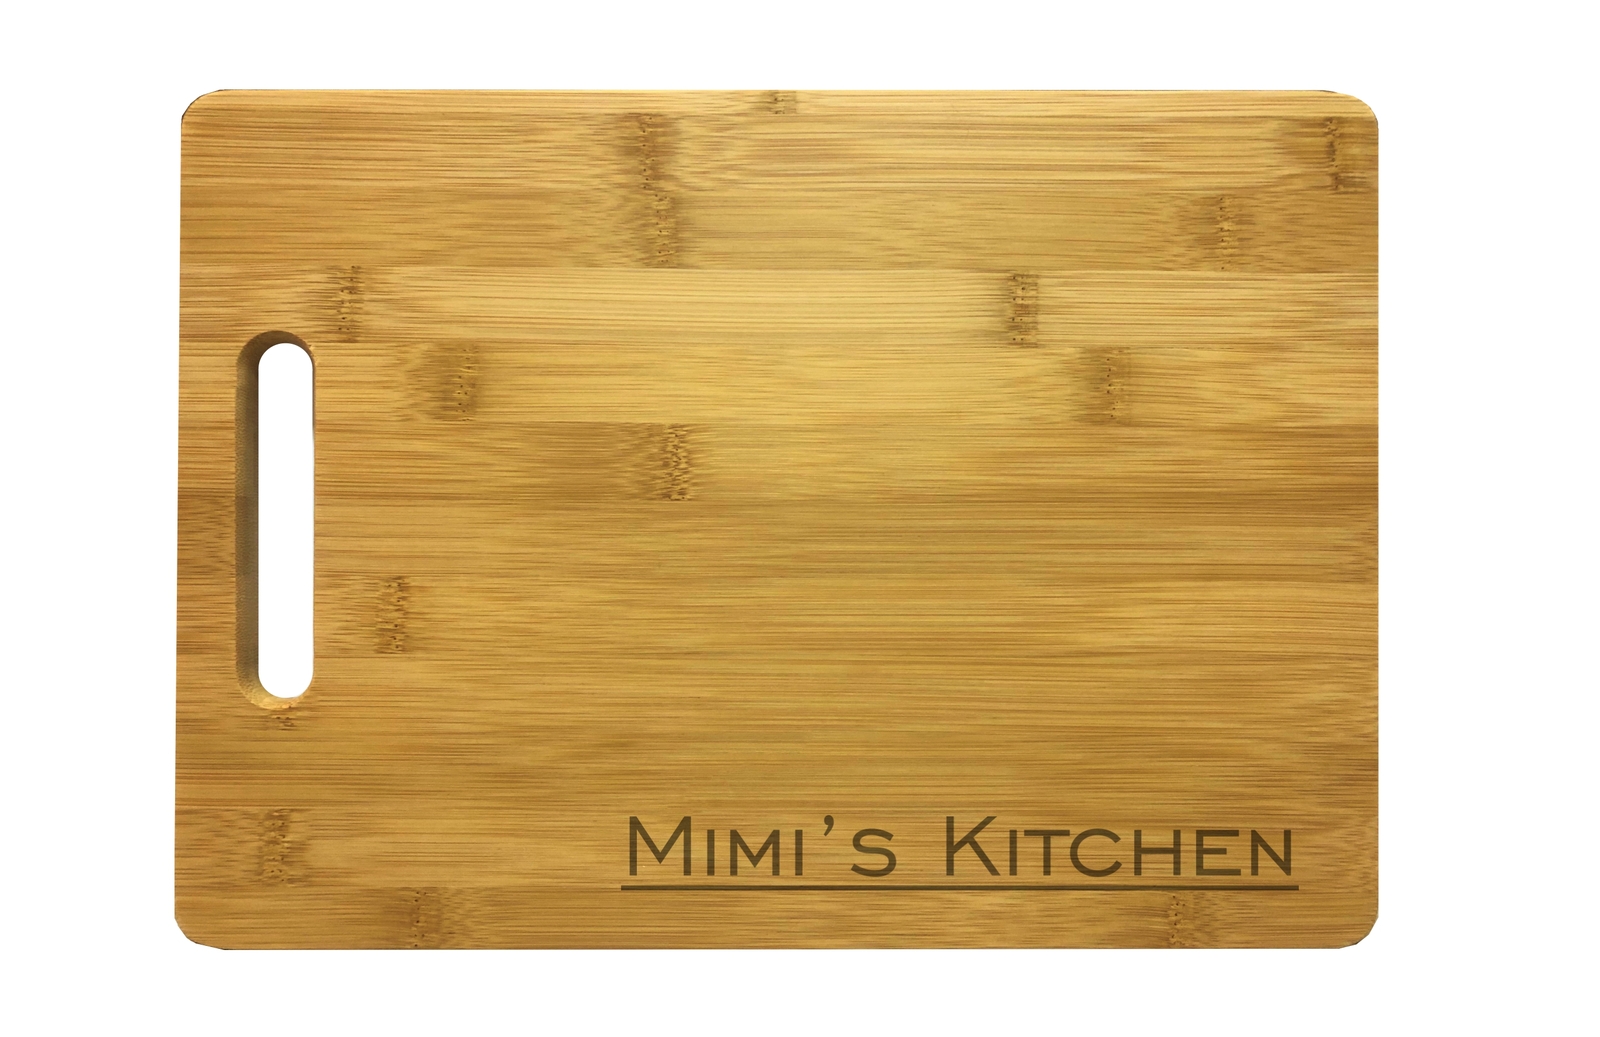 Primary image for Mimi's Kitchen Engraved Cutting Board -Bamboo/Maple- Grandma Gift Mothers Day